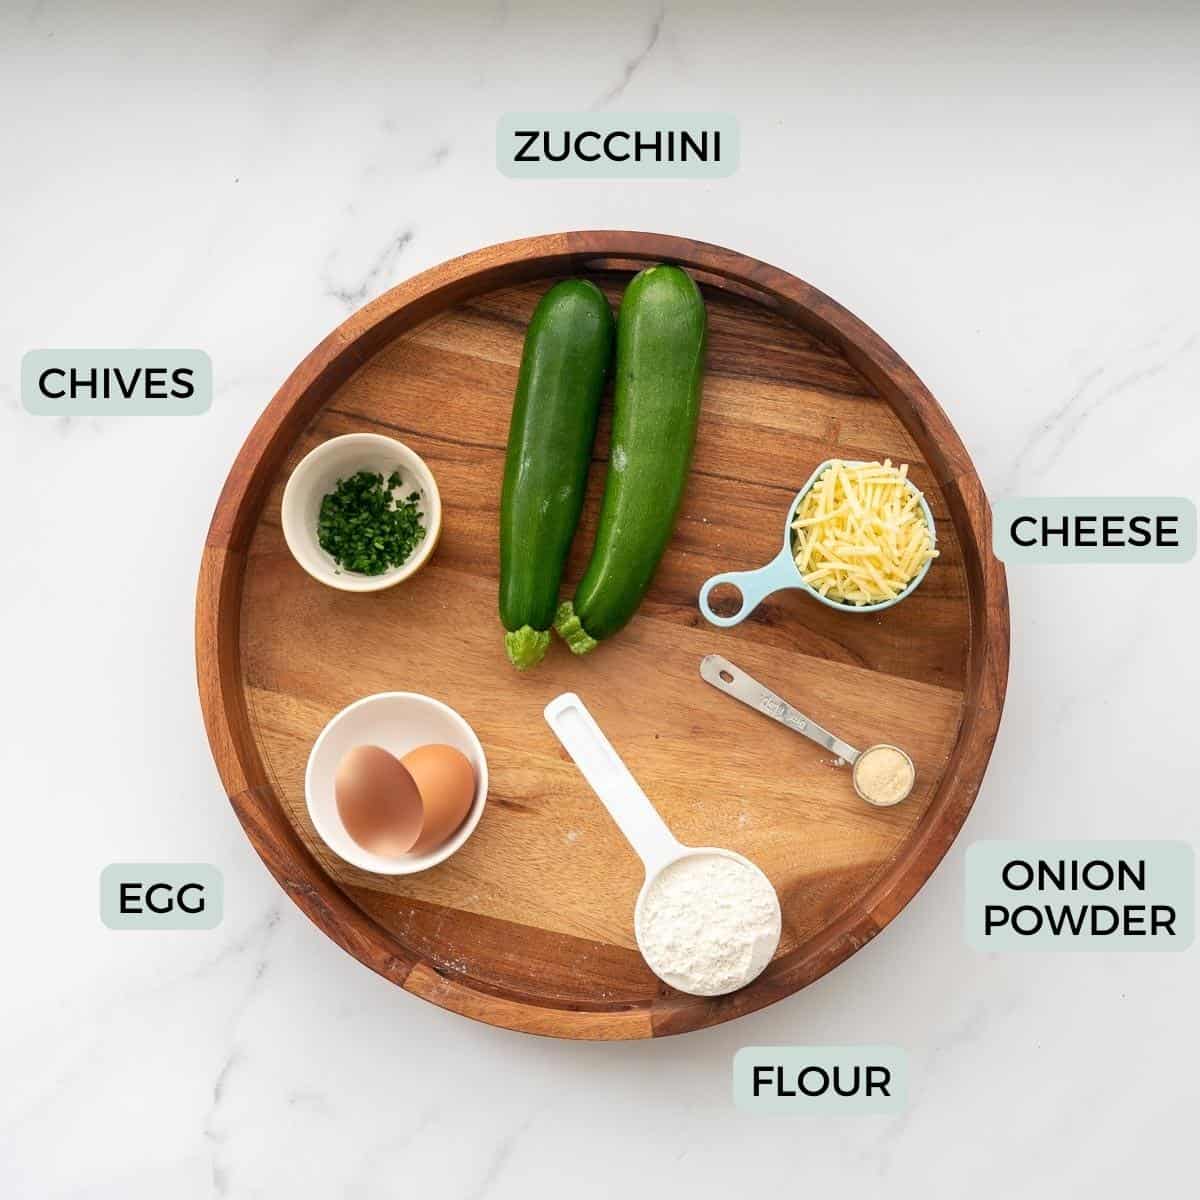 The ingredients to make zucchini tots on a round wooden tray with text overlay.